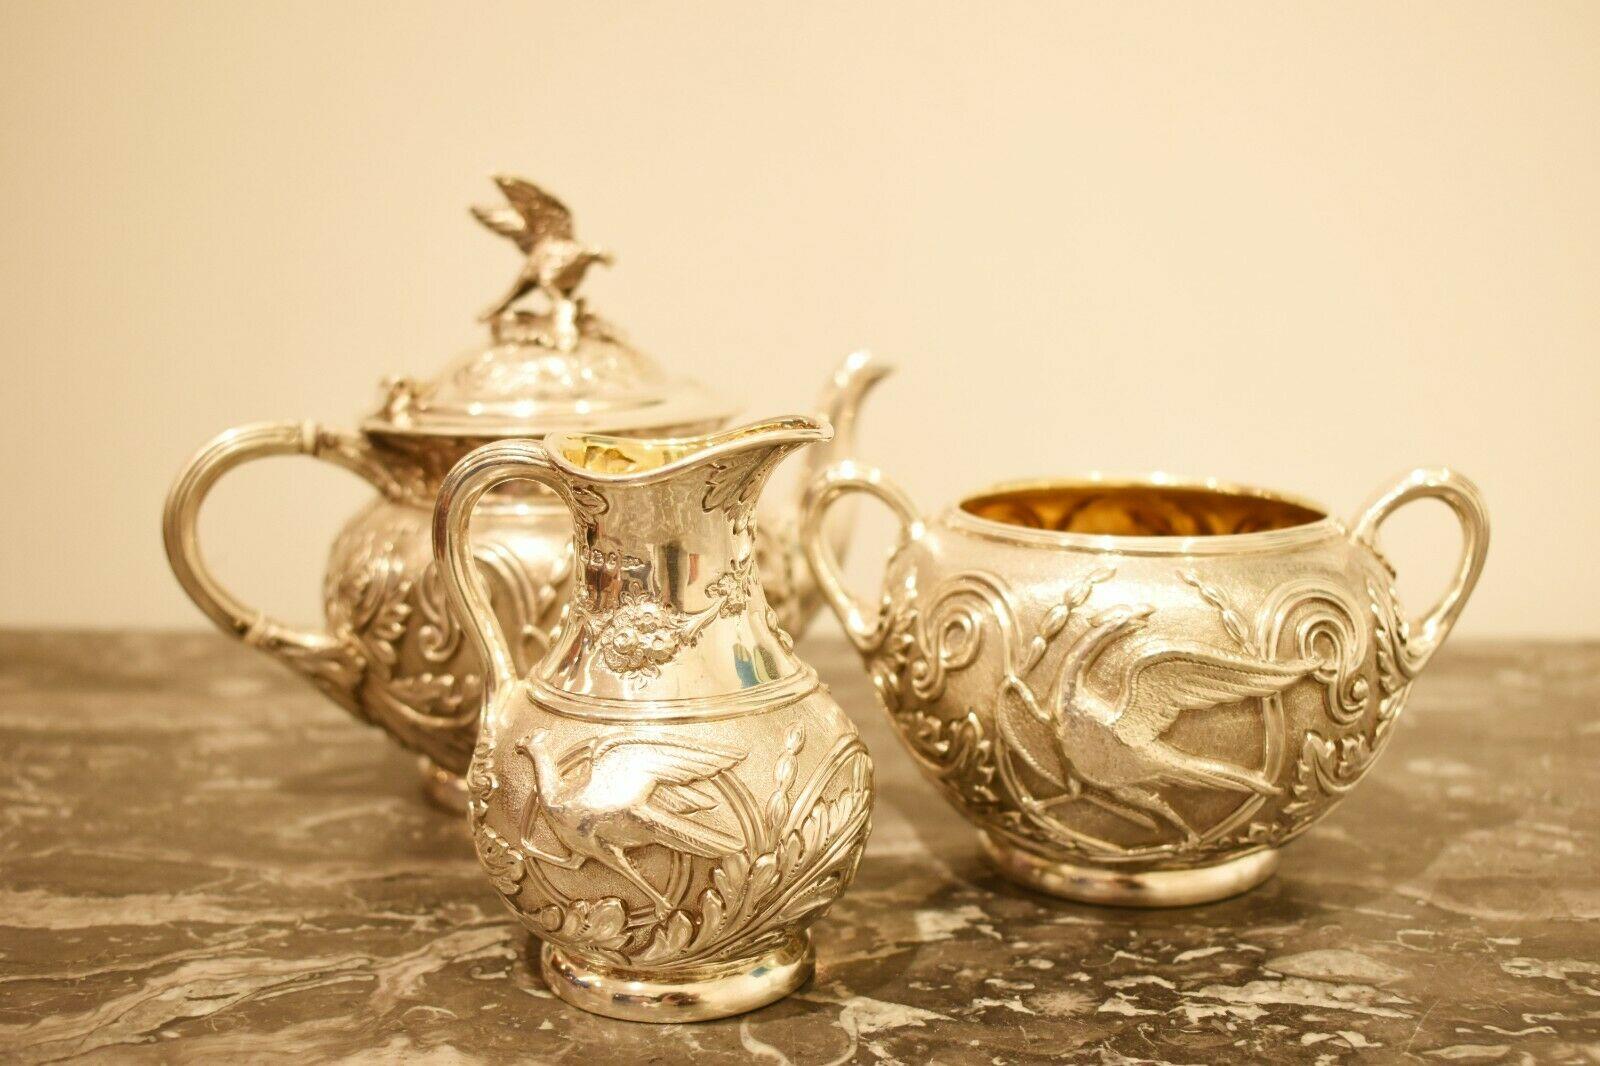 Antique Victorian solid silver 3 piece bachelor tea set by Walker and Hall 1897

Antique Edwardian three piece silver tea set by Walker & Hall consisting of a teapot, sugar bowl and milk jug. 

Rare and unique, this beautiful tea set's pattern